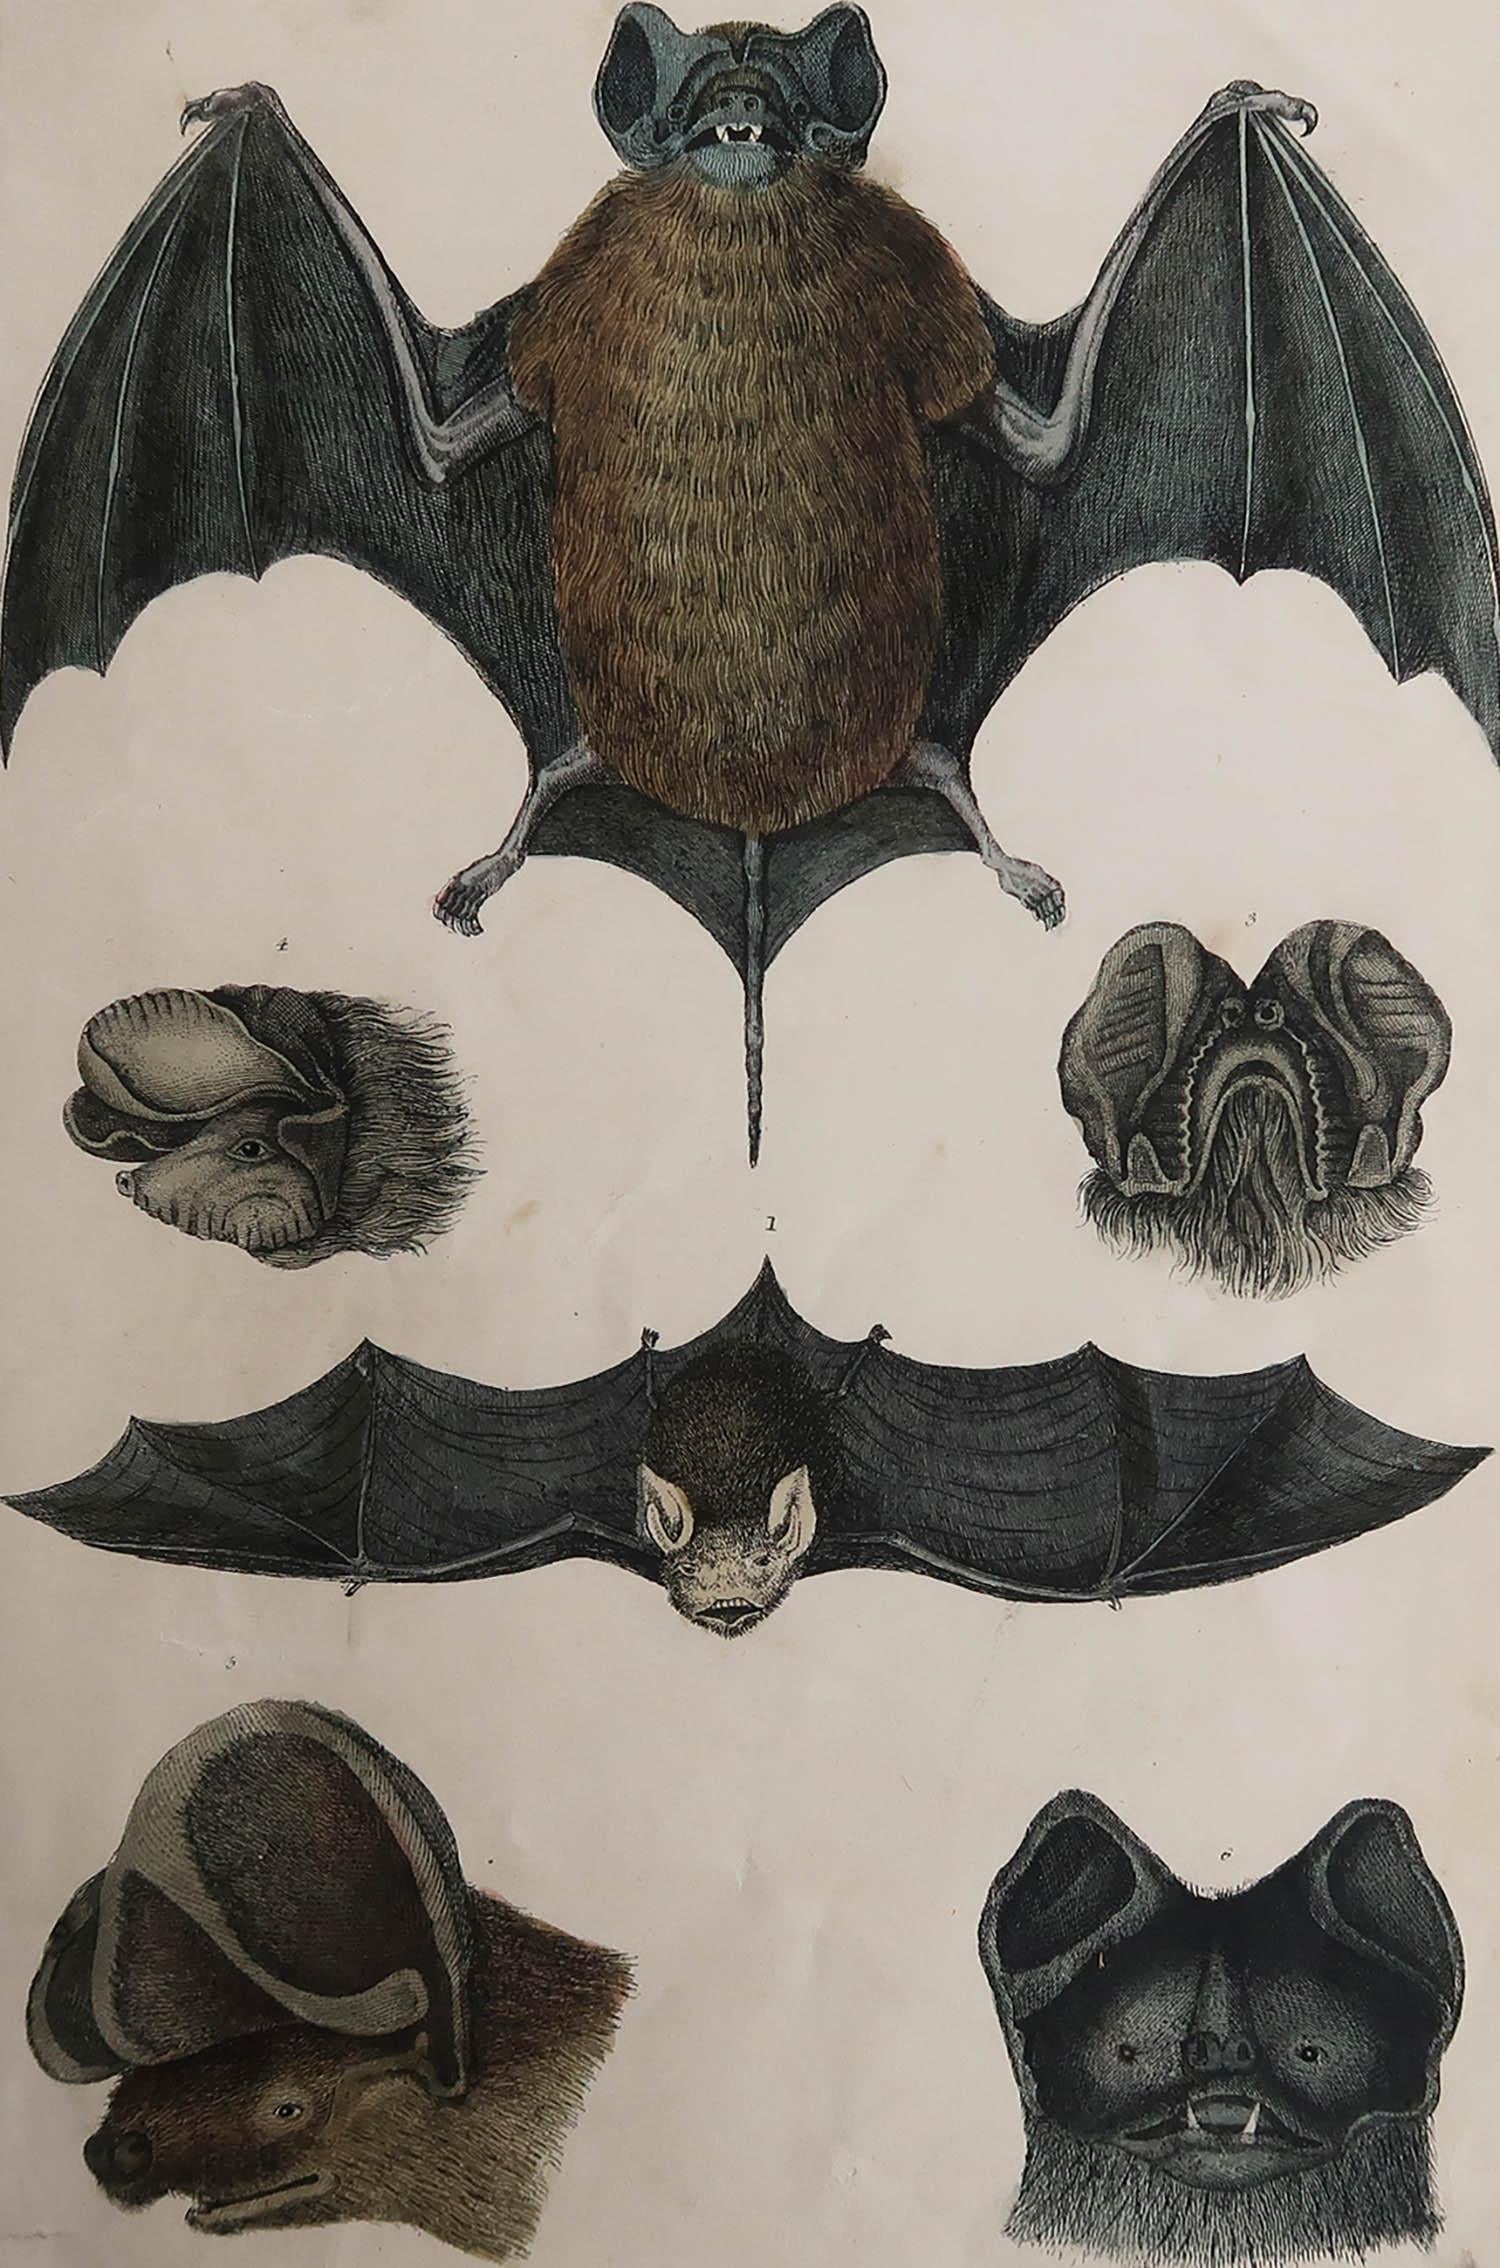 Great image of a bat.

Unframed. It gives you the option of perhaps making a set up using your own choice of frames.

Lithograph after Cpt. brown with original hand color.

Published 1847.

Repair to a minor tear bottom left corner

Free